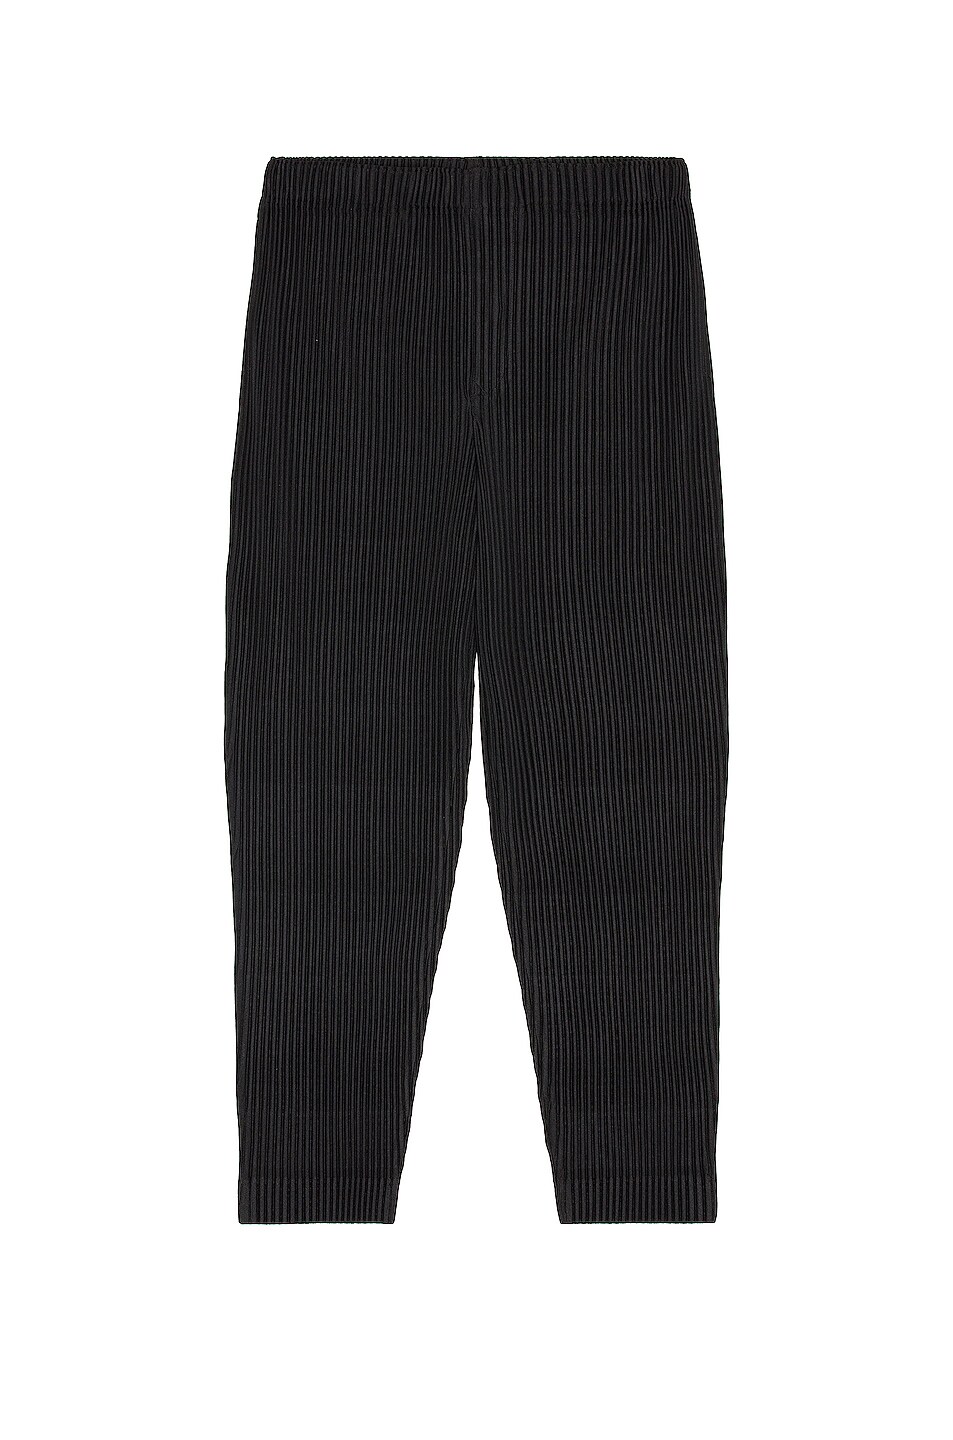 Image 1 of Homme Plisse Issey Miyake Pleats Bottoms 2 Pant in Black